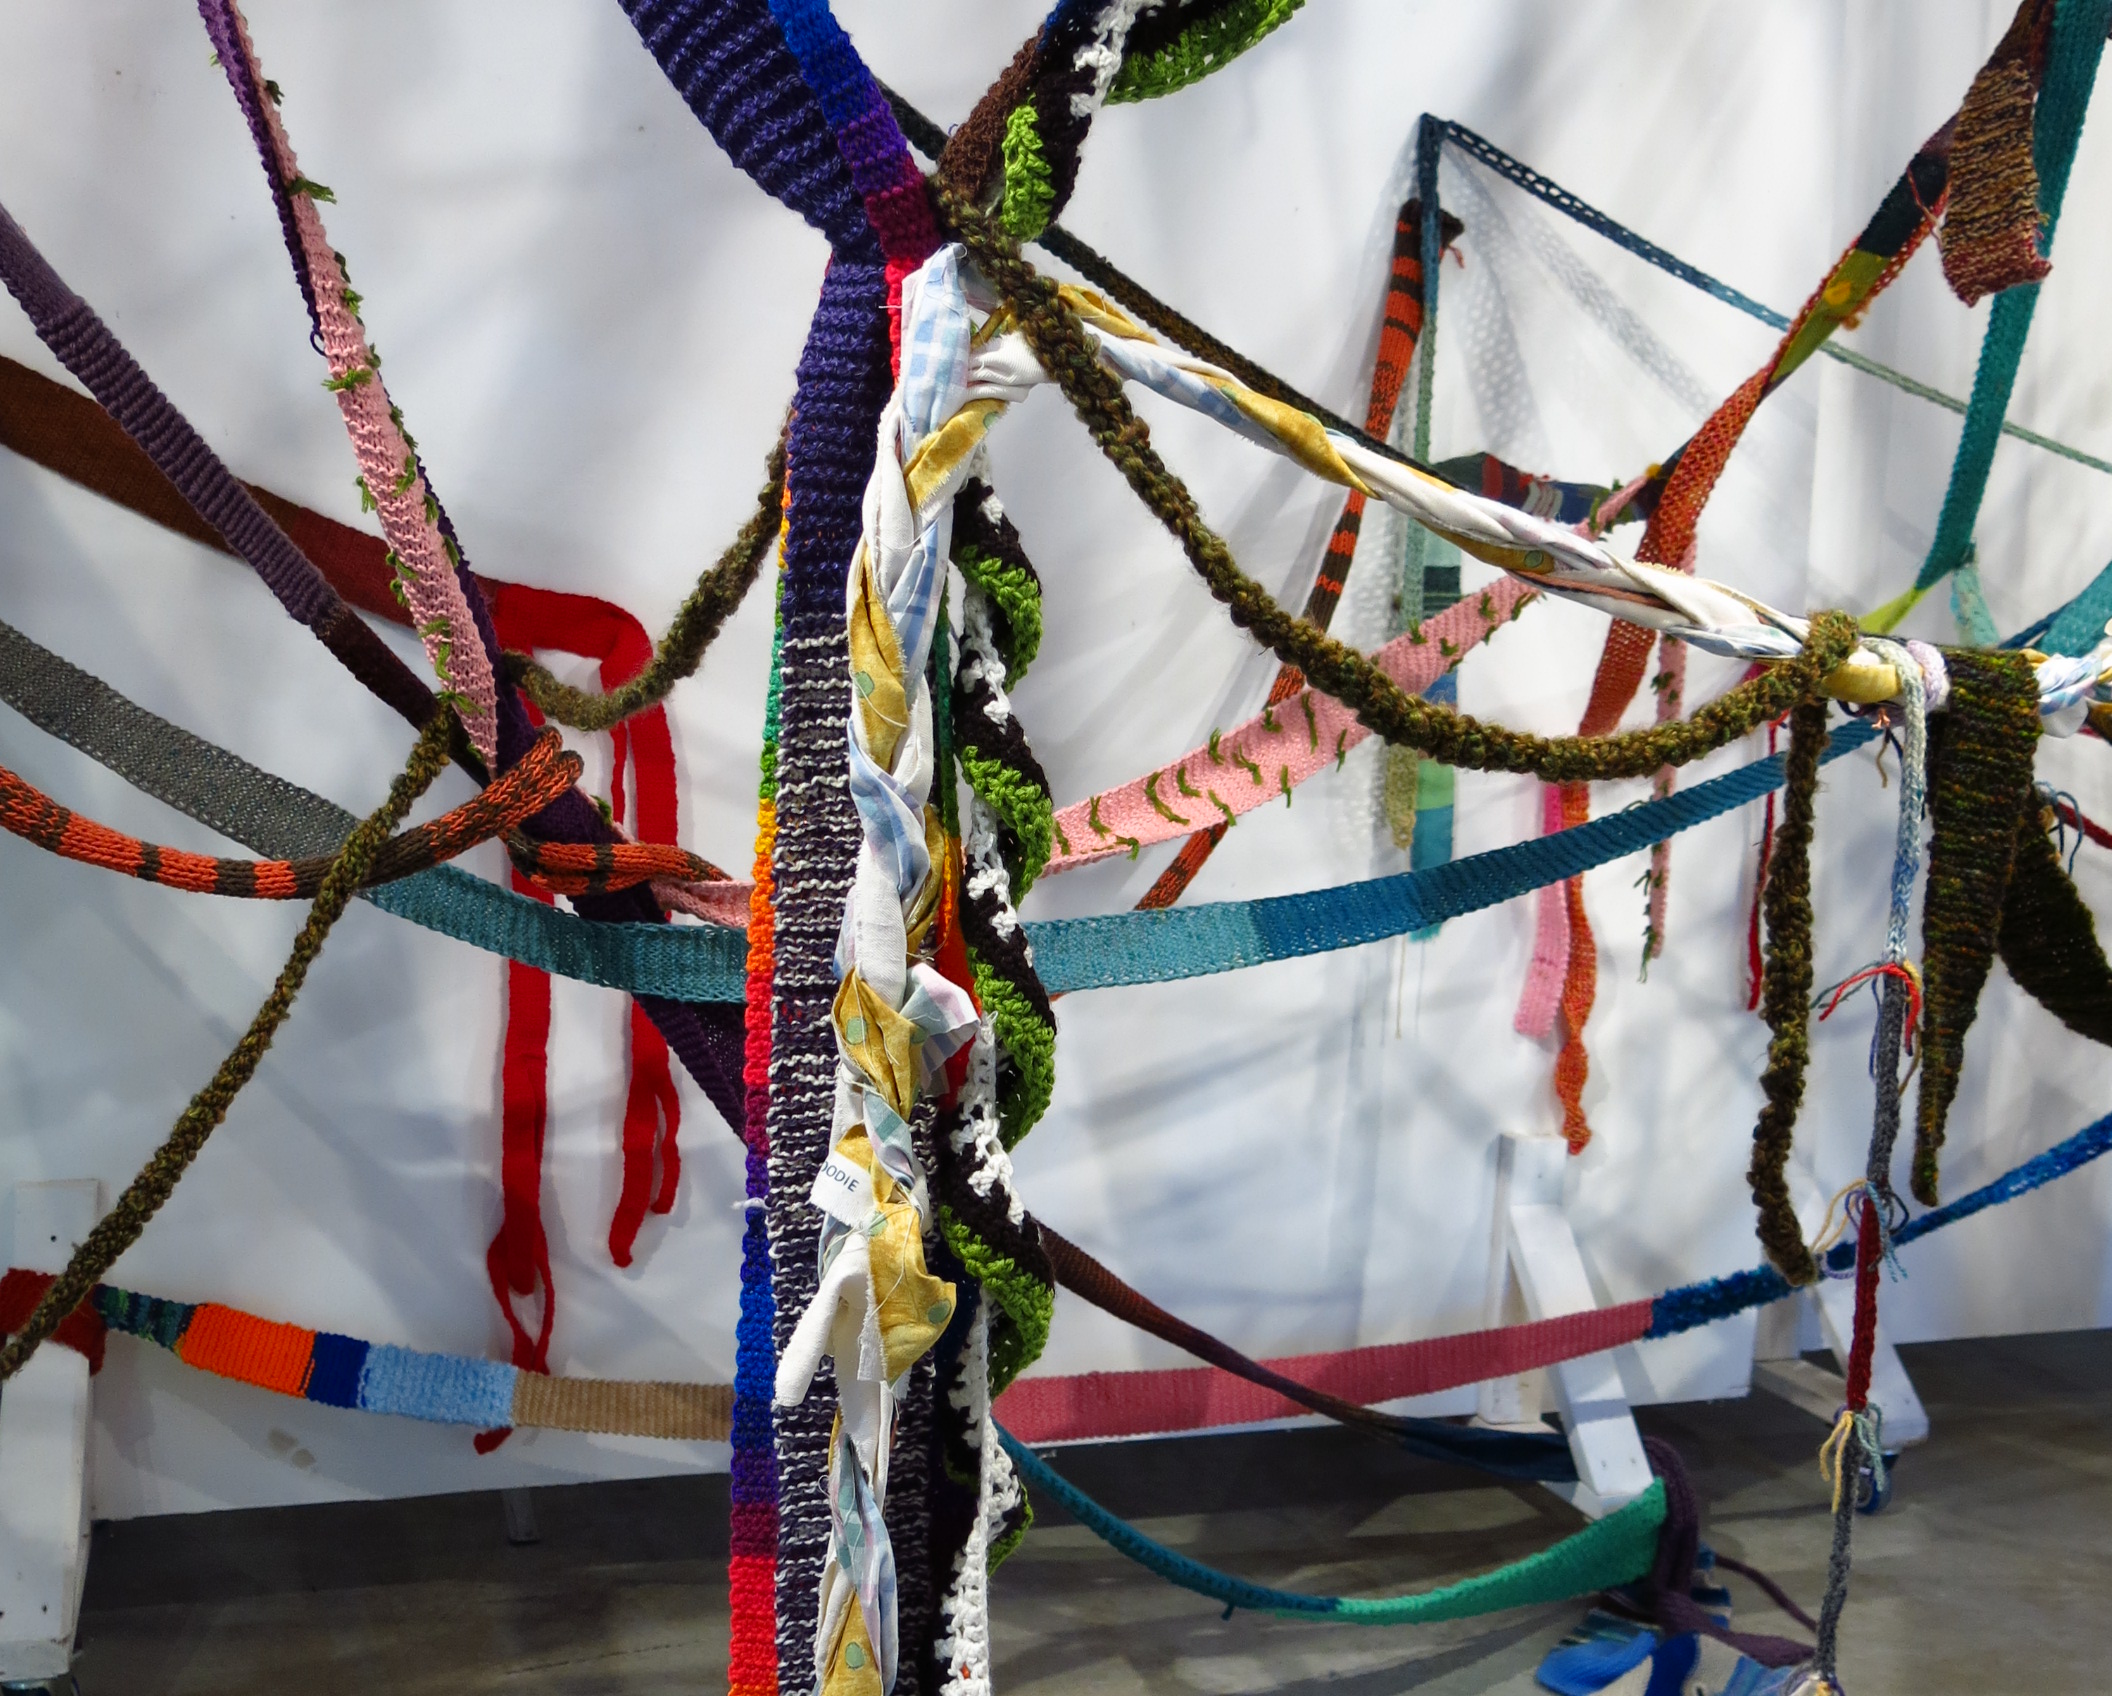 Brightly coloured textiles roped together hang from a ceiling